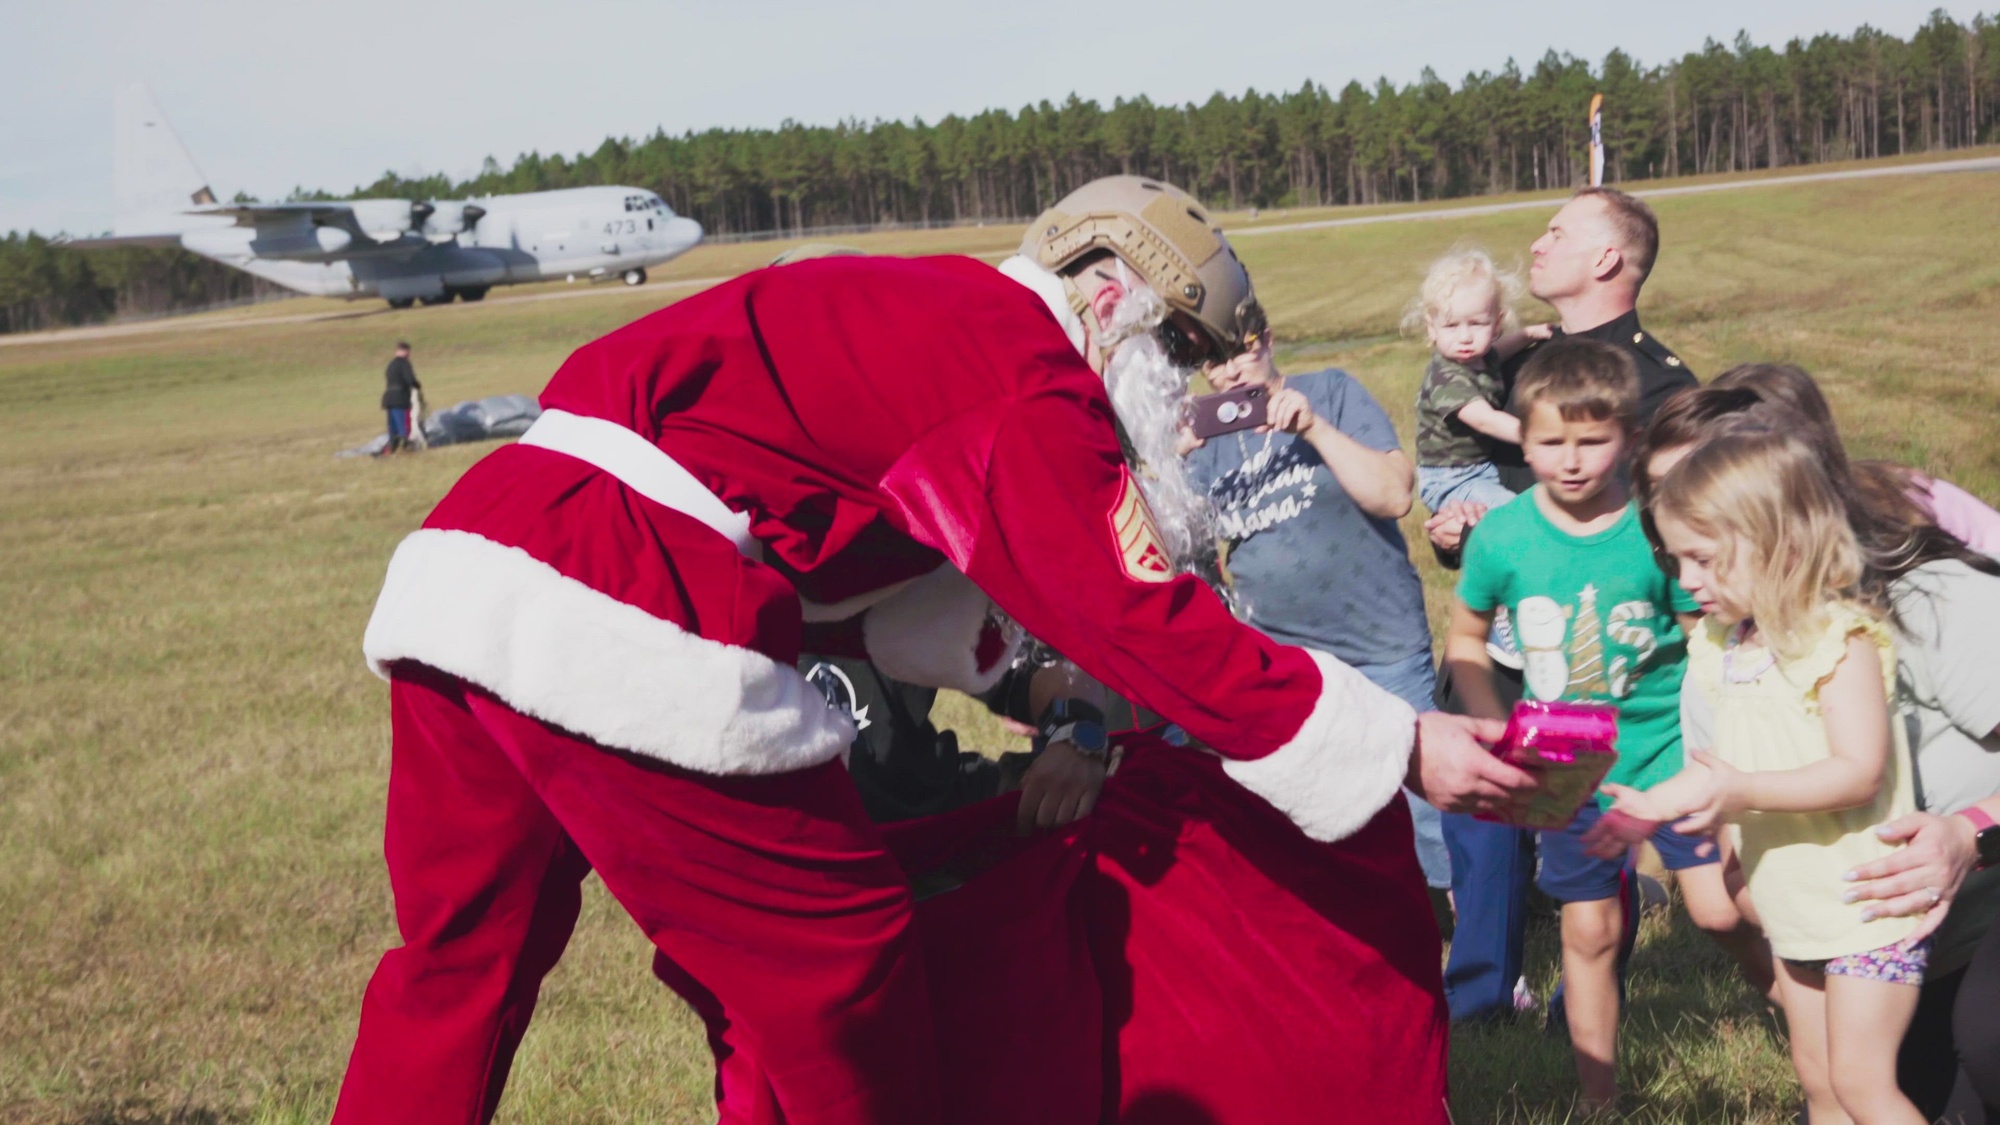 U.S. Marines assigned to 3rd Force Reconnaissance Company, 4th Marine Division, Marine Forces Reserve conduct parachute operations in their dress blue uniforms with help from Santa to delivery toys and raise awareness for the annual U.S. Marine Corps Reserve Toys for Tots Program, at Camp Shelby, Mississippi, November 10, 2022. Toys for Tots, a 75-year national charitable program run by the U.S. Marine Corps Reserve, provides happiness and hope to less fortunate children during each Christmas holiday season. The toys, books, and other gifts collected and distributed by the Marines offer these children recognition and a positive memory for a lifetime. (U.S. Marine Corps video by Cpl. James Stanfield)

The music within the following video production is copyright material used under license with HookSounds contract dated 1 Dec 2021.